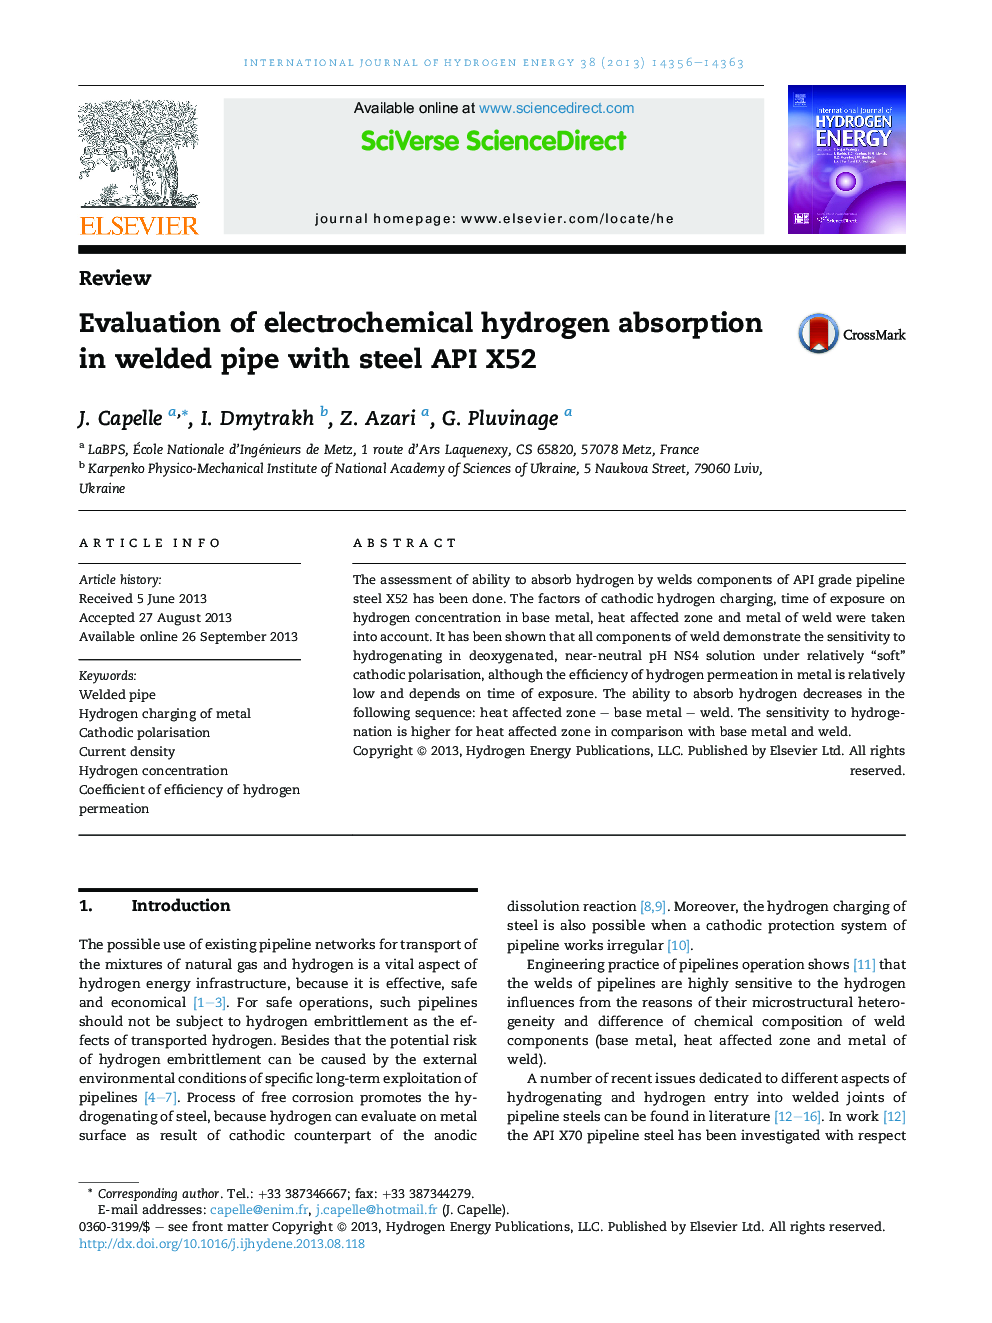 Evaluation of electrochemical hydrogen absorption in welded pipe with steel API X52